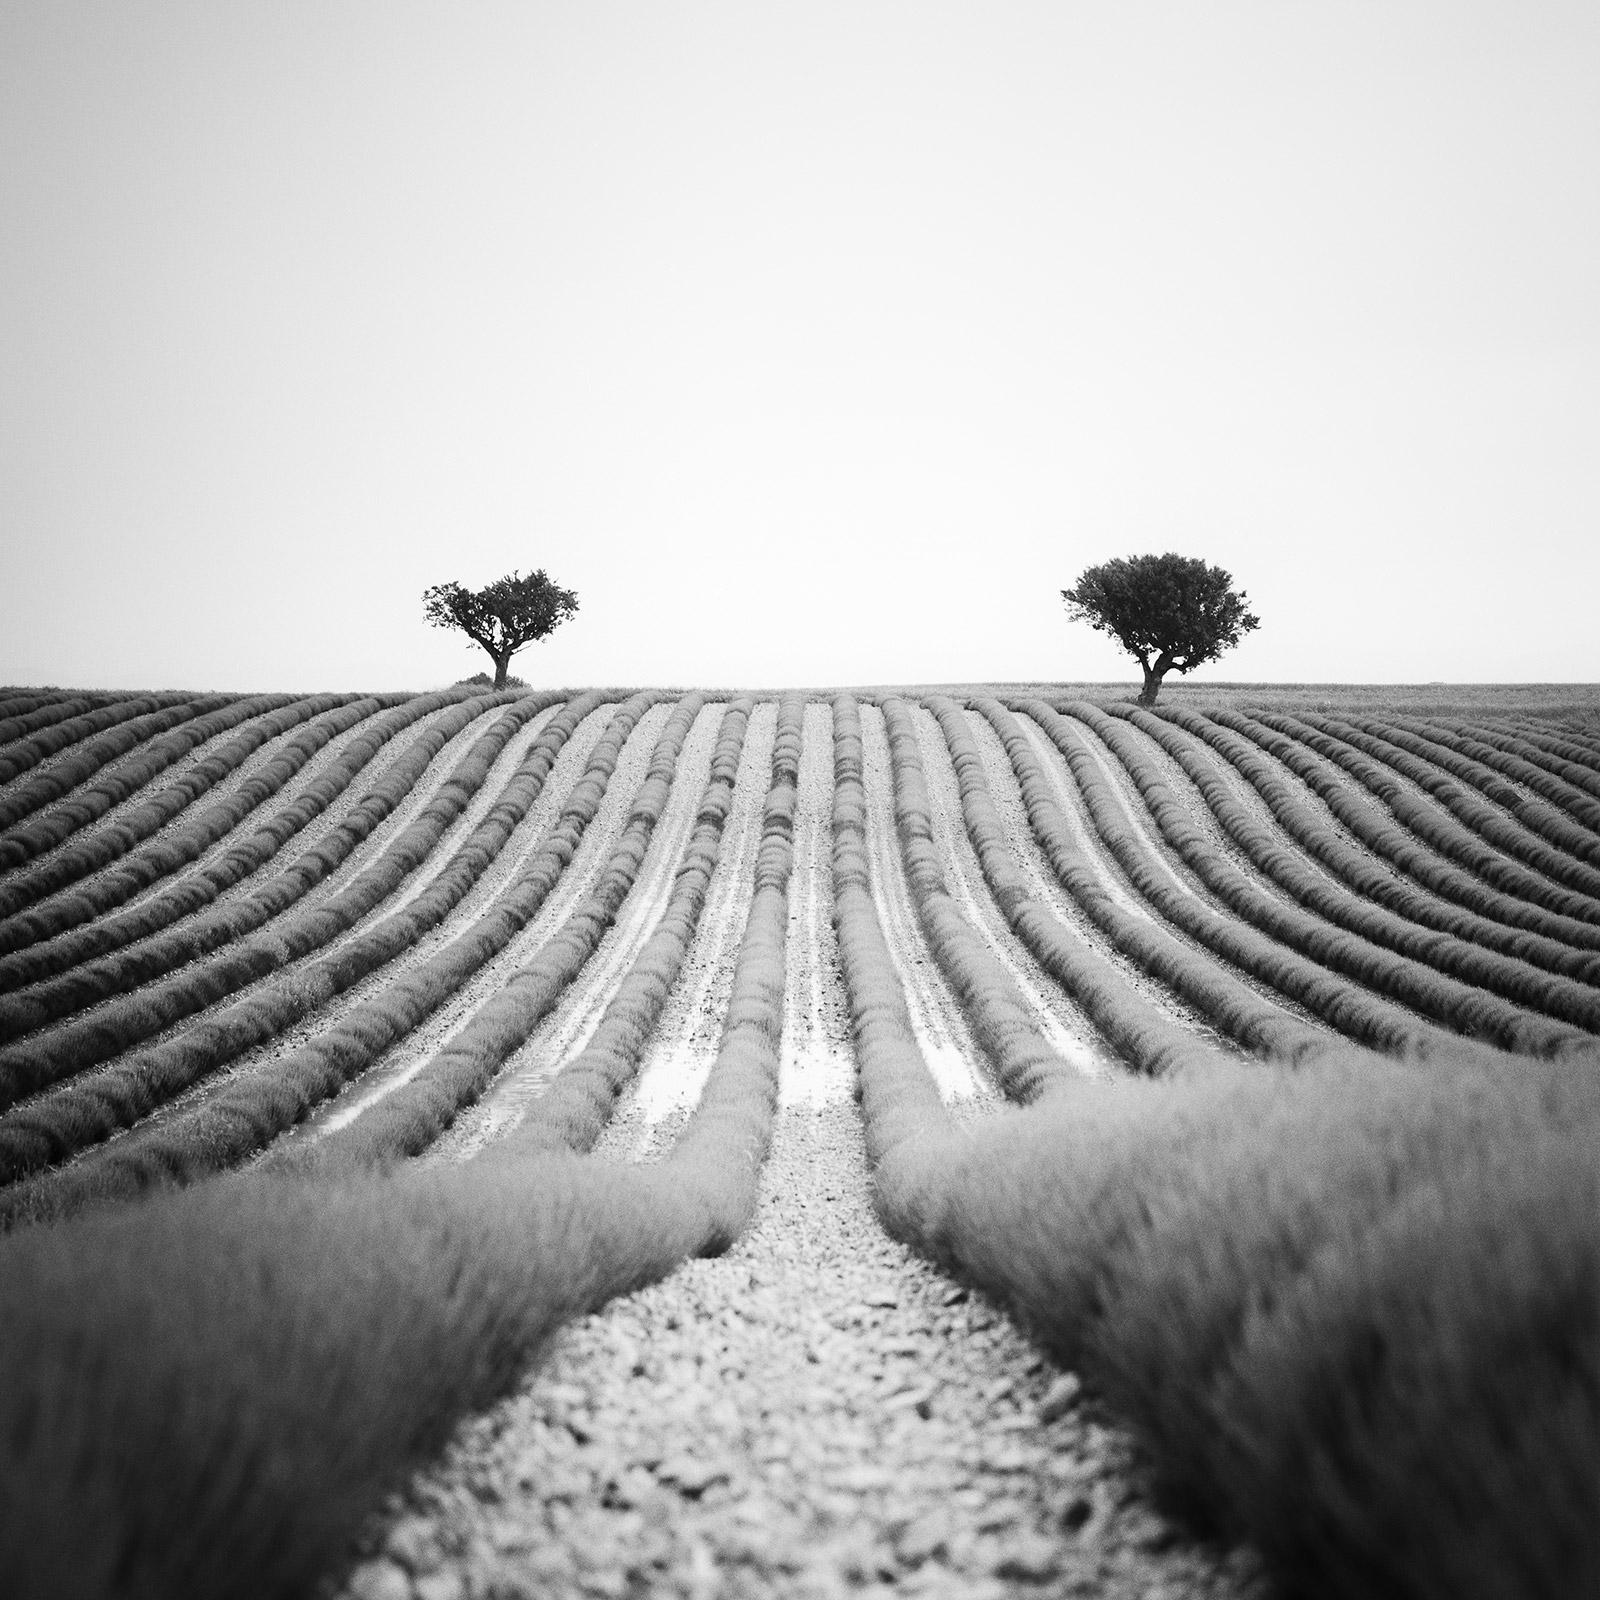 Gerald Berghammer Landscape Photograph - Lavender Field, Trees, Provence, France, black and white landscape photography